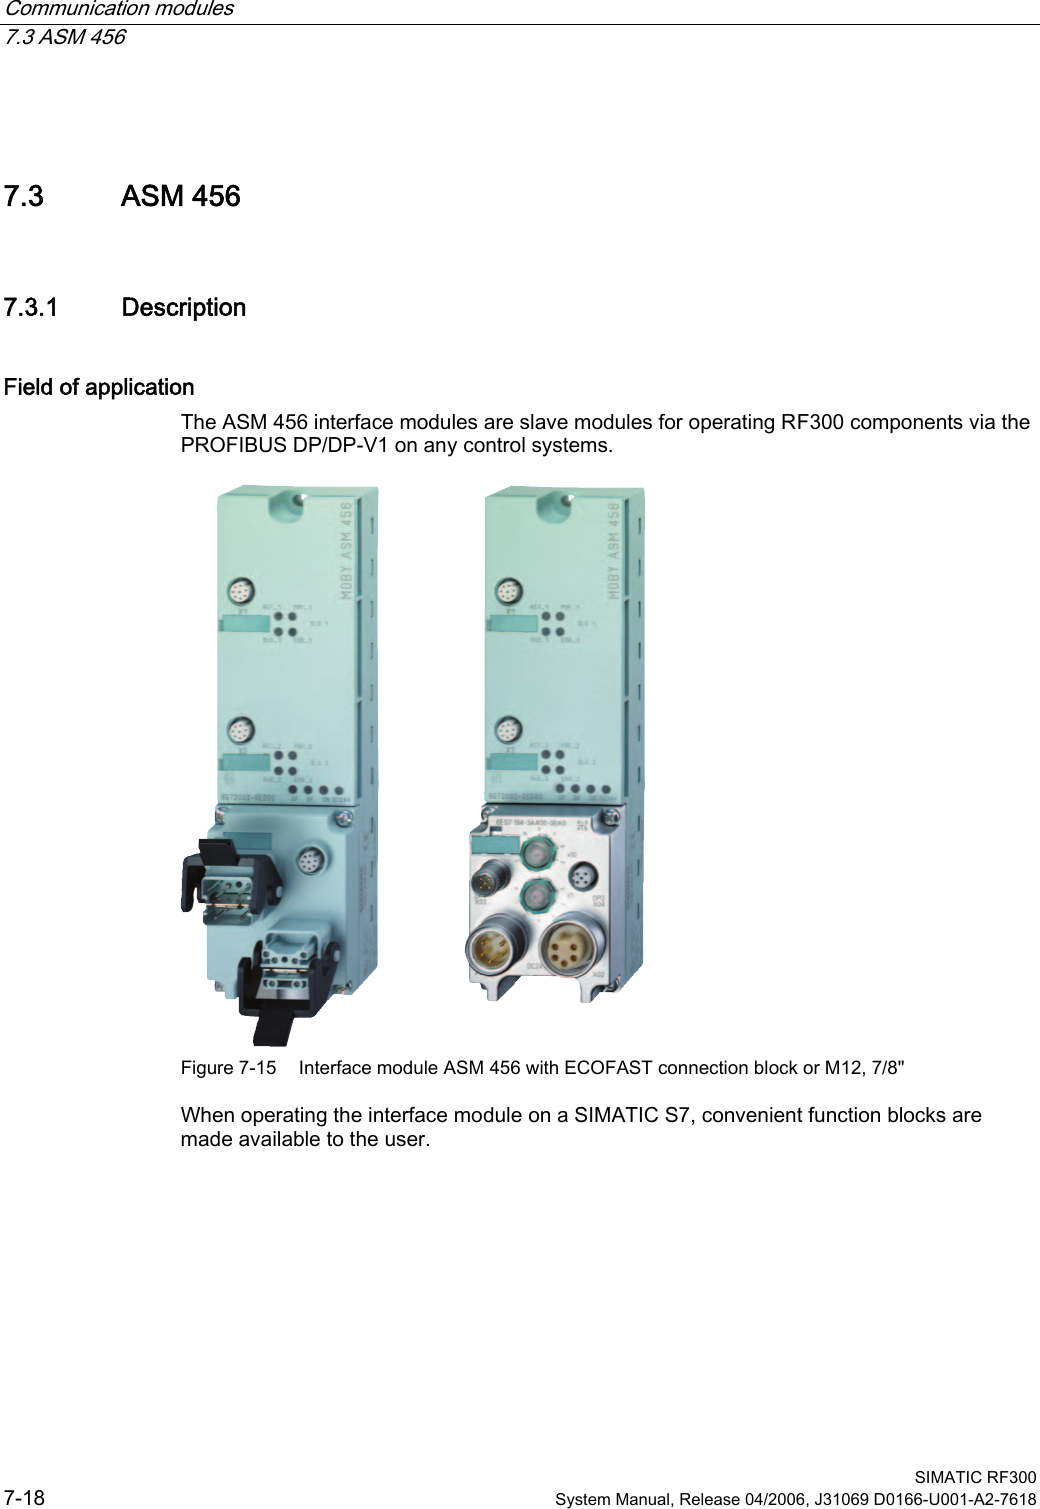 Communication modules 7.3 ASM 456  SIMATIC RF300 7-18  System Manual, Release 04/2006, J31069 D0166-U001-A2-7618 7.3 7.3 ASM 456 7.3.1  Description Field of application The ASM 456 interface modules are slave modules for operating RF300 components via the PROFIBUS DP/DP-V1 on any control systems.  Figure 7-15  Interface module ASM 456 with ECOFAST connection block or M12, 7/8&quot; When operating the interface module on a SIMATIC S7, convenient function blocks are made available to the user. 